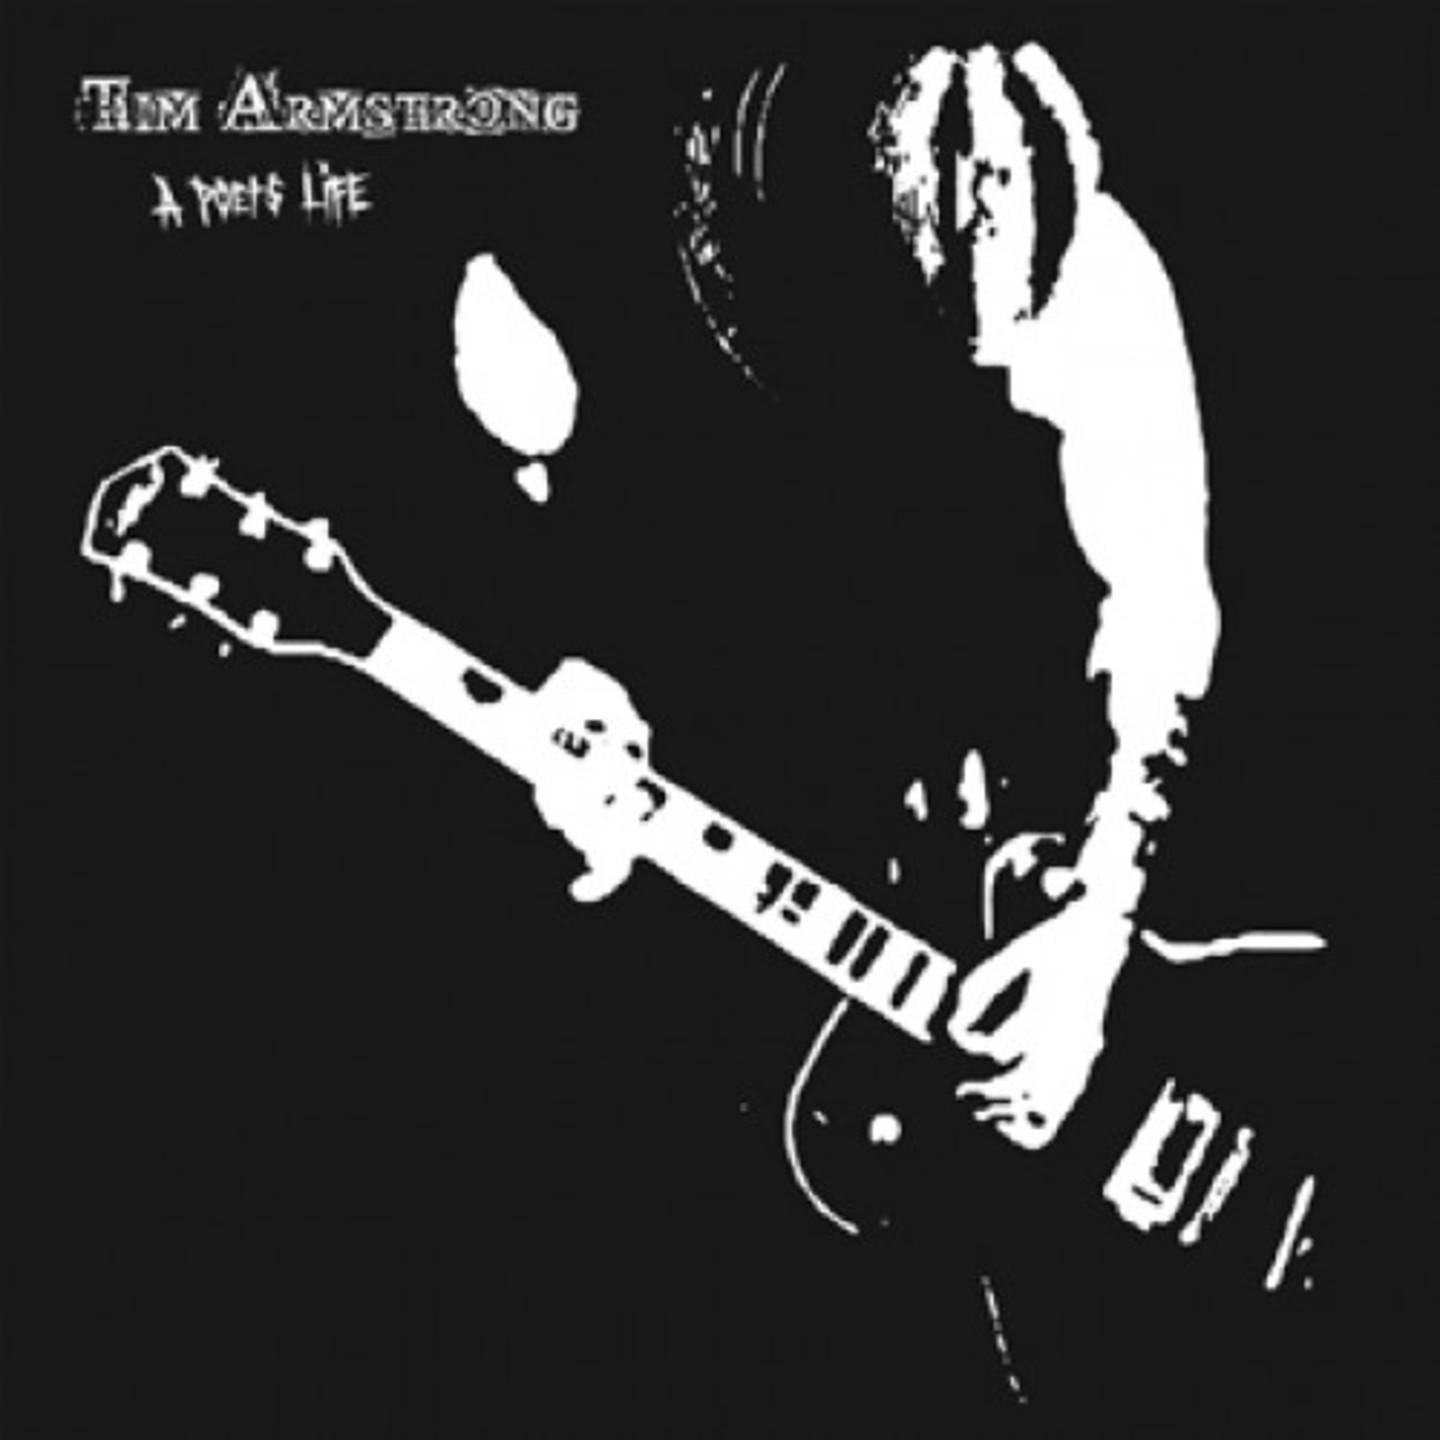 TIM ARMSTRONG - A Poets Life LP